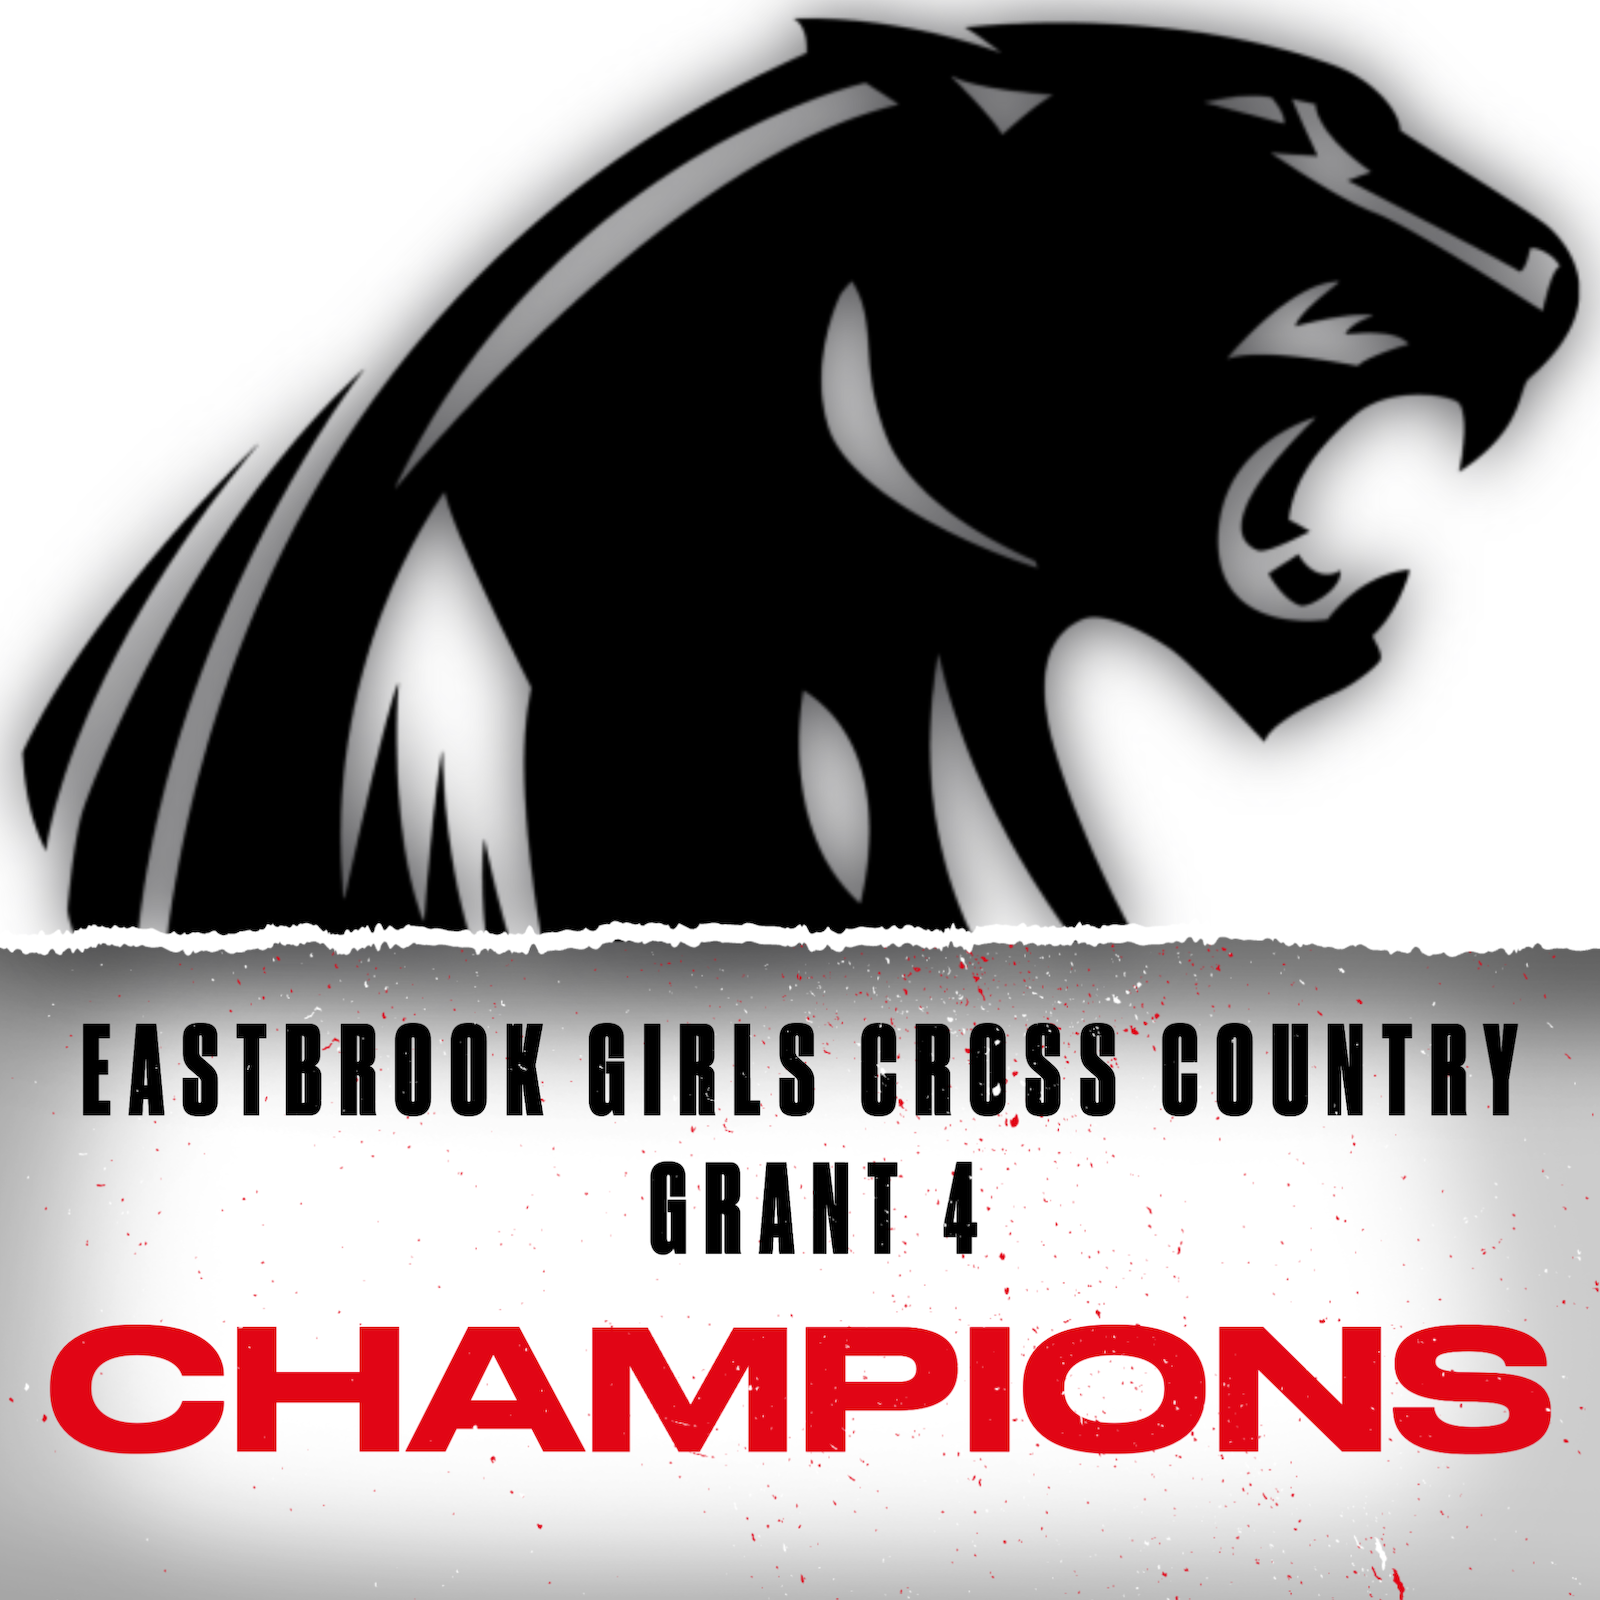 Girls Cross Country Team is Grant 4 Champs cover photo